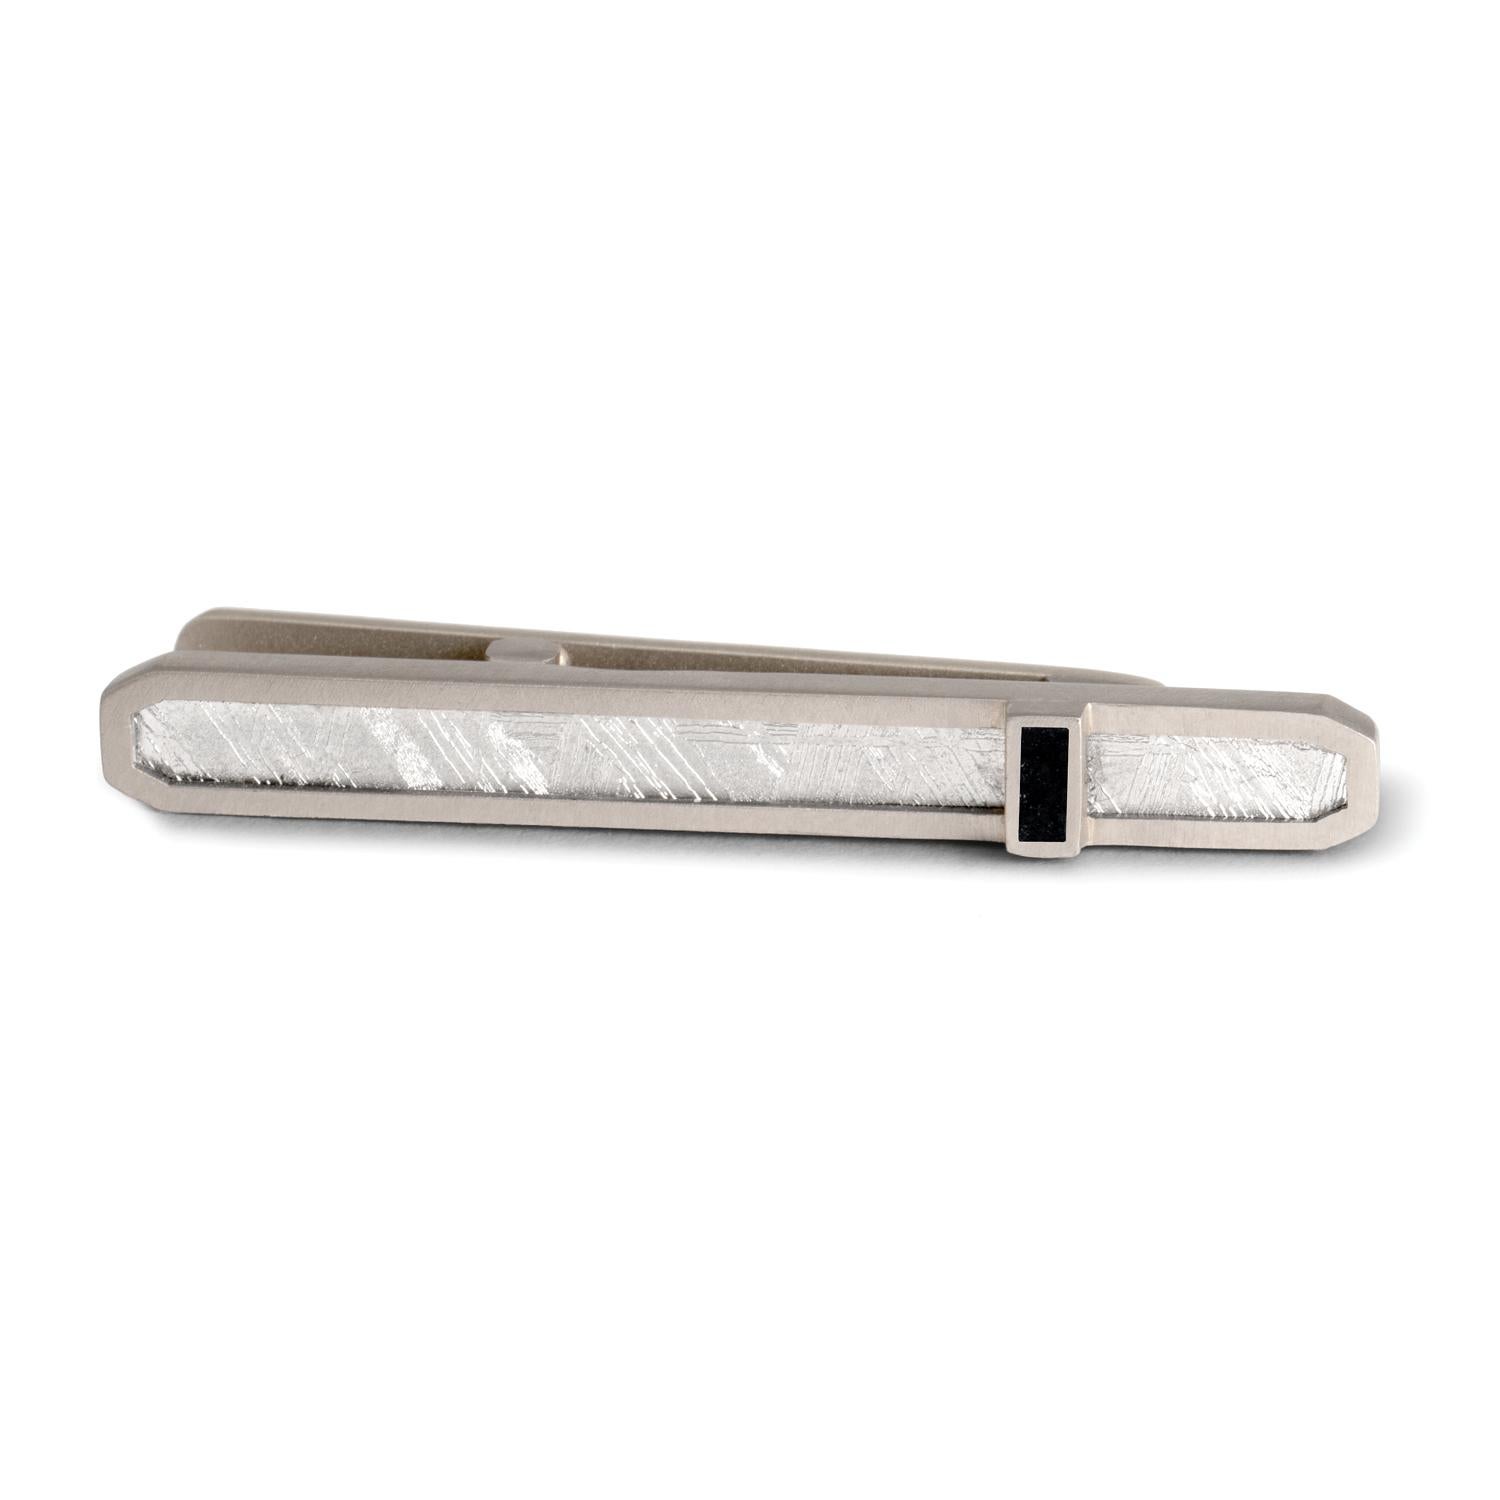 Widmanstätten pattern meteorite slice dimension tie bar with black Guatemalan jade inlay, 18 carat recycled palladium white gold  - One-of-a-kind

Inspired by the intersection of Earth and sky, this tie bar juxtaposes a slice of 4.6 billion year old